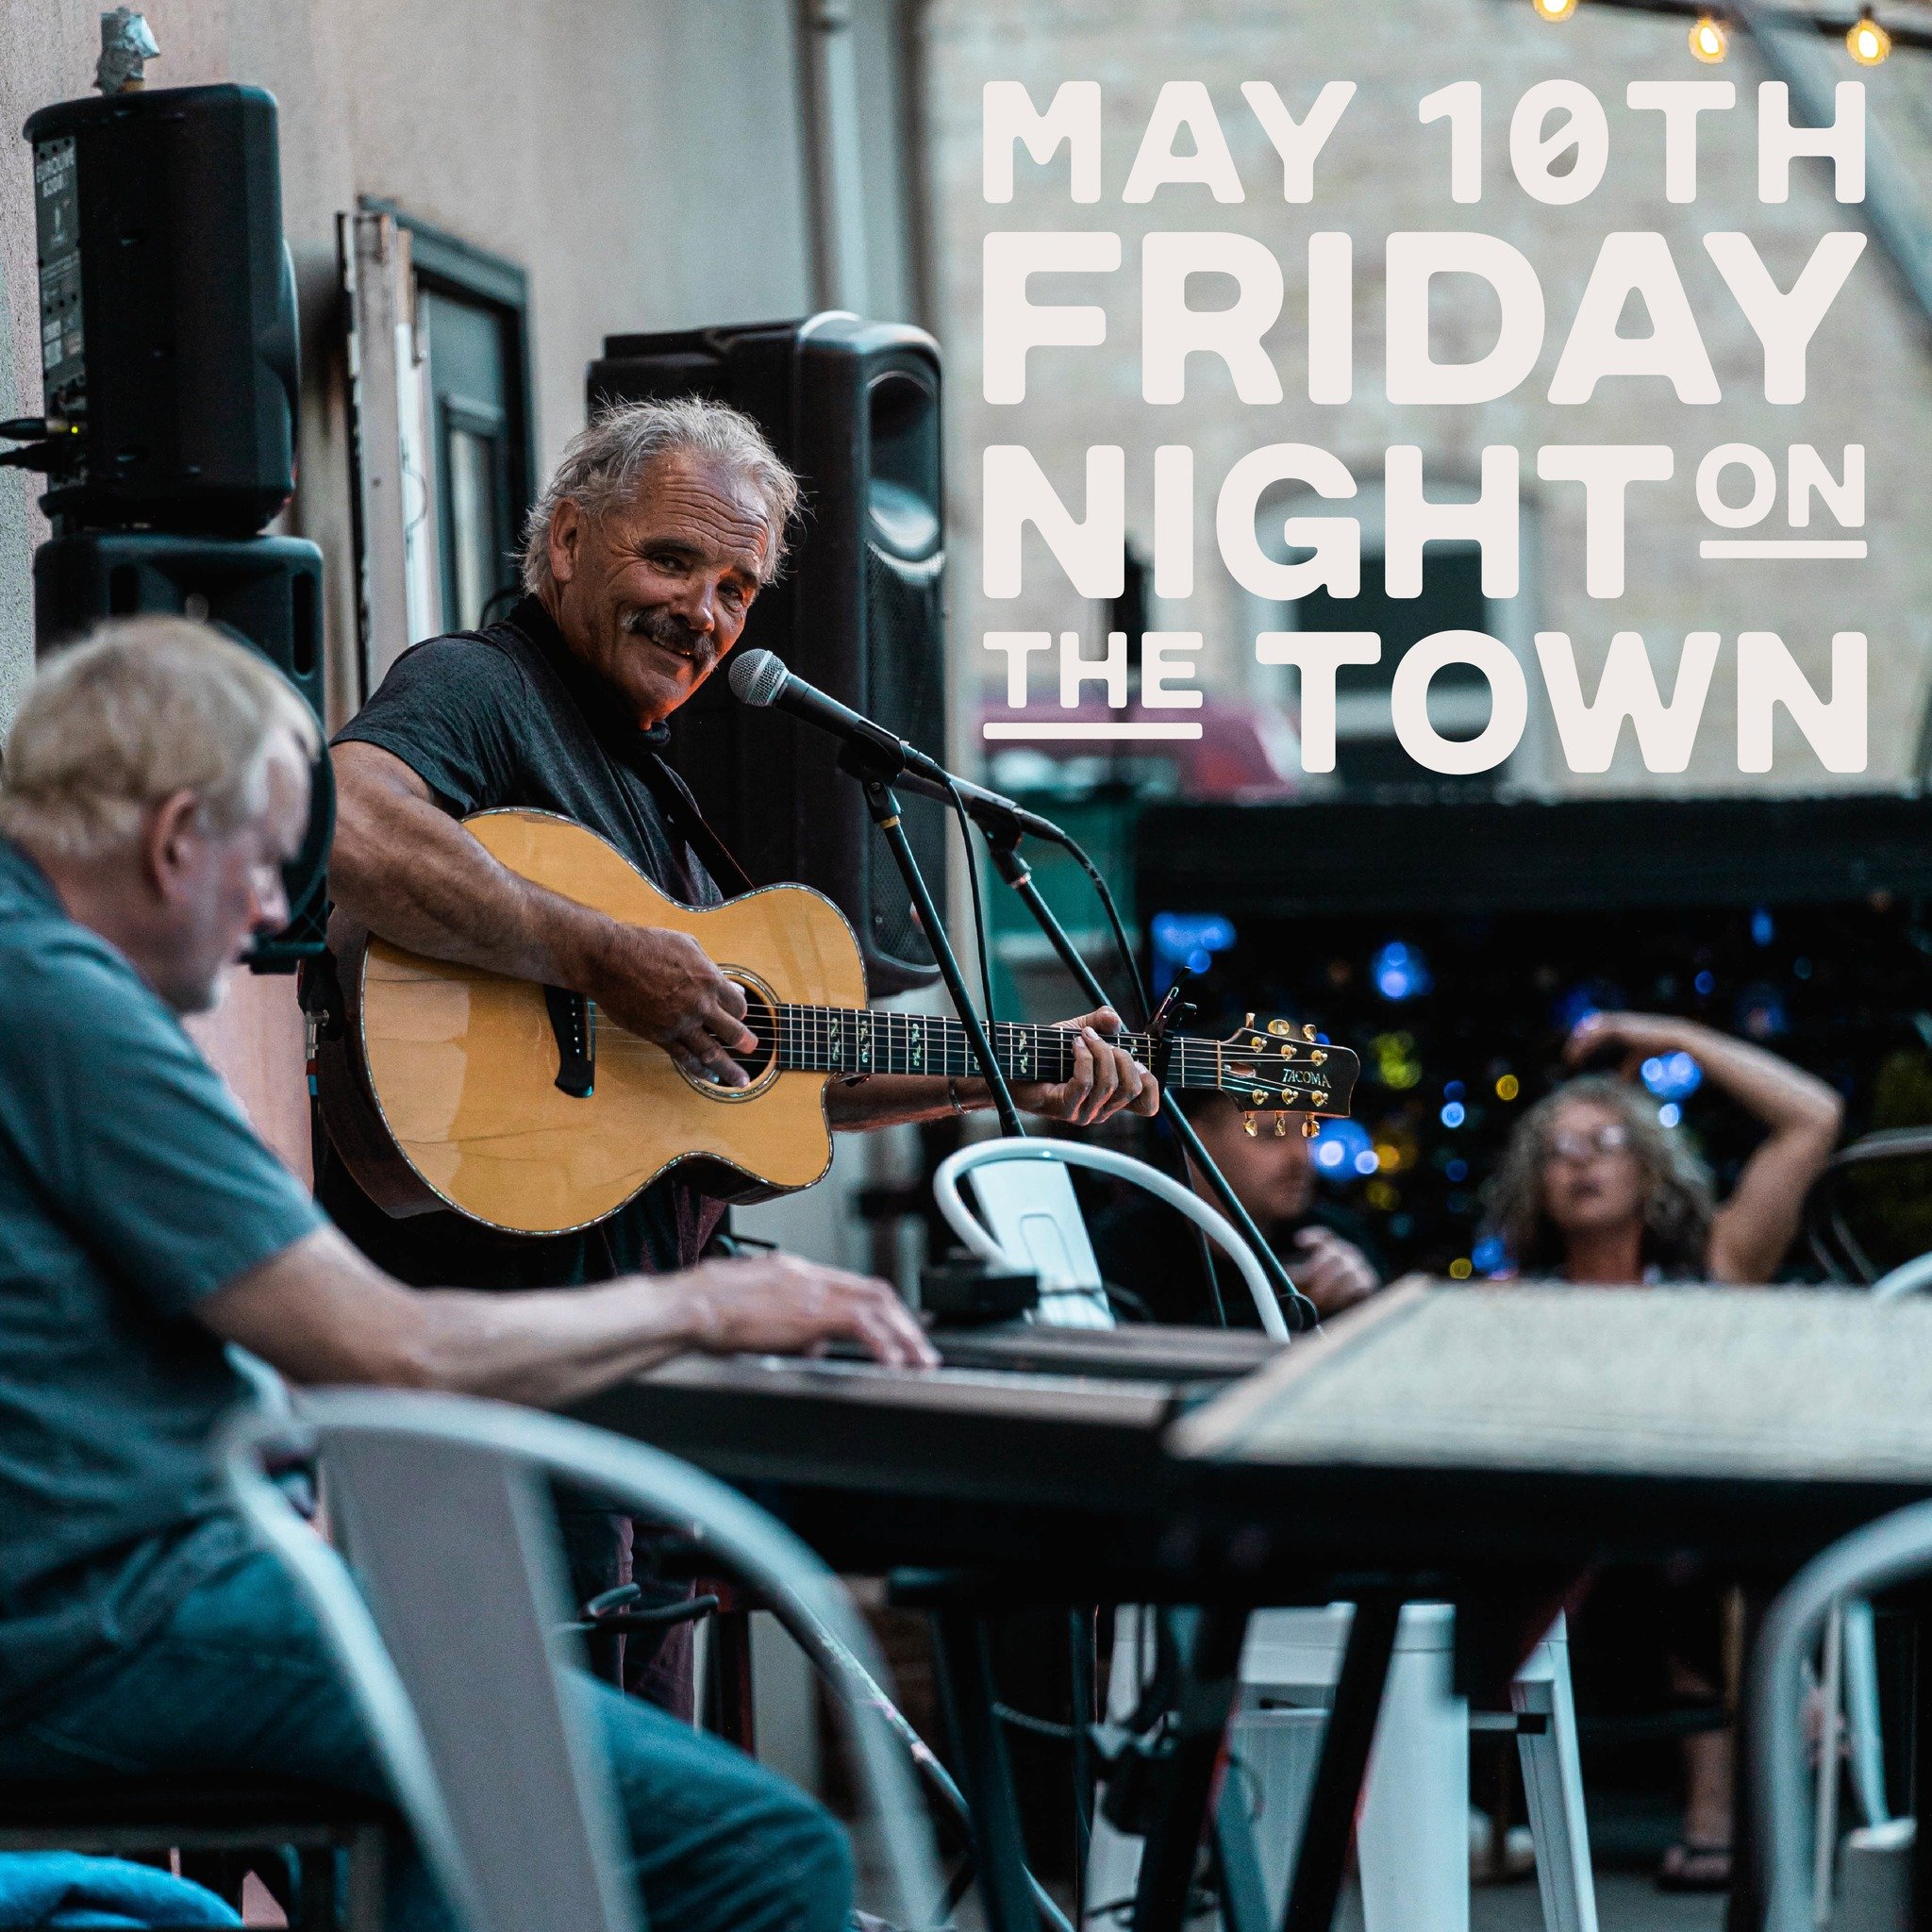 We have musicians and live art booked for Friday night! Be sure to head Downtown Loveland for &quot;An Evening in Bloom&quot; which is our theme this month! 
To learn more about our monthly themes and to see the live entertainment we have booked this